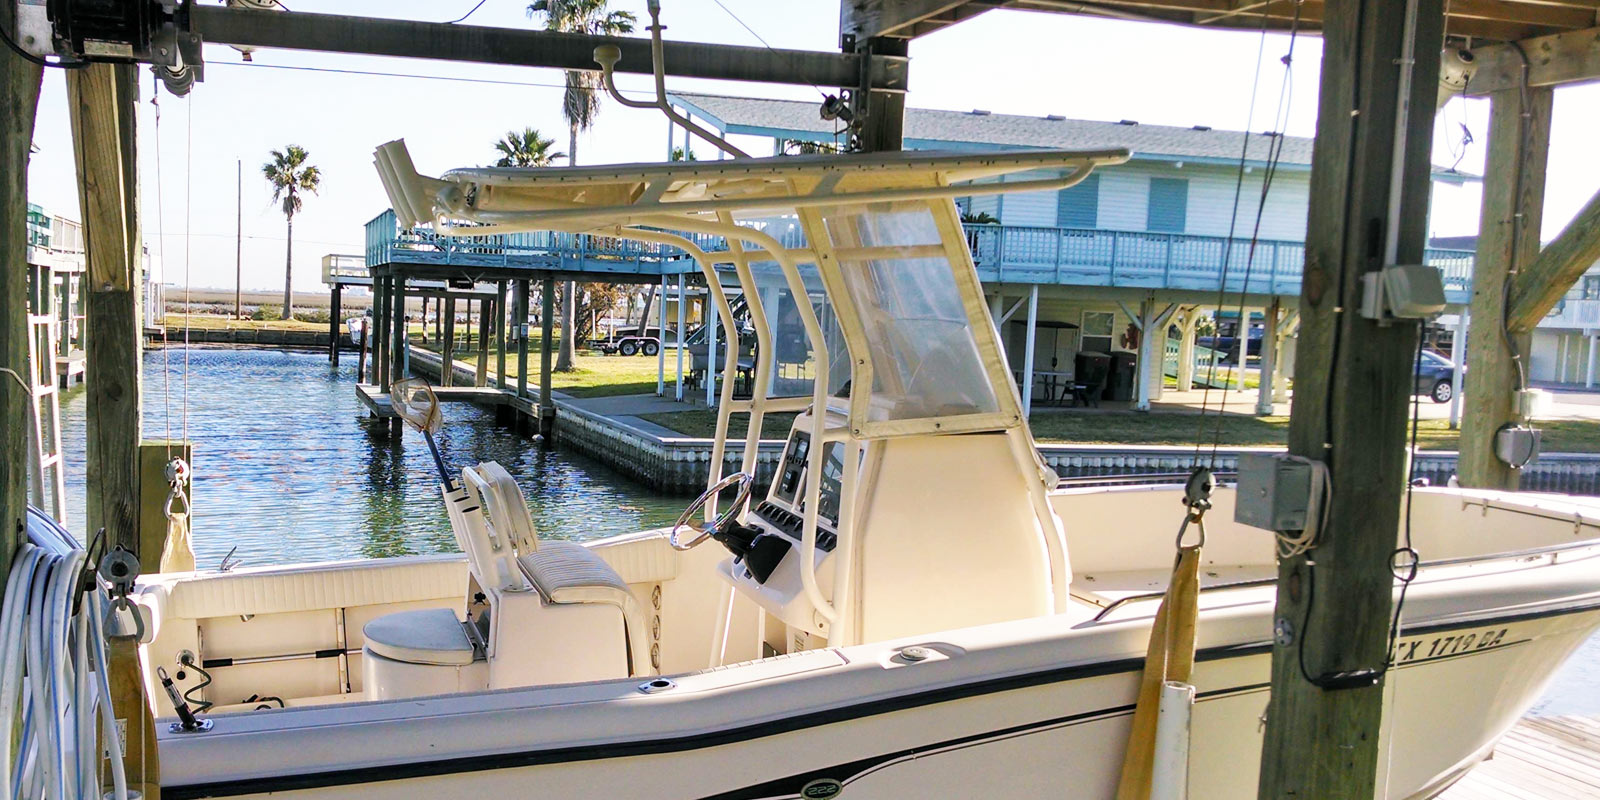 We offer a variety of colors and finishes for your boat or watercraft project.